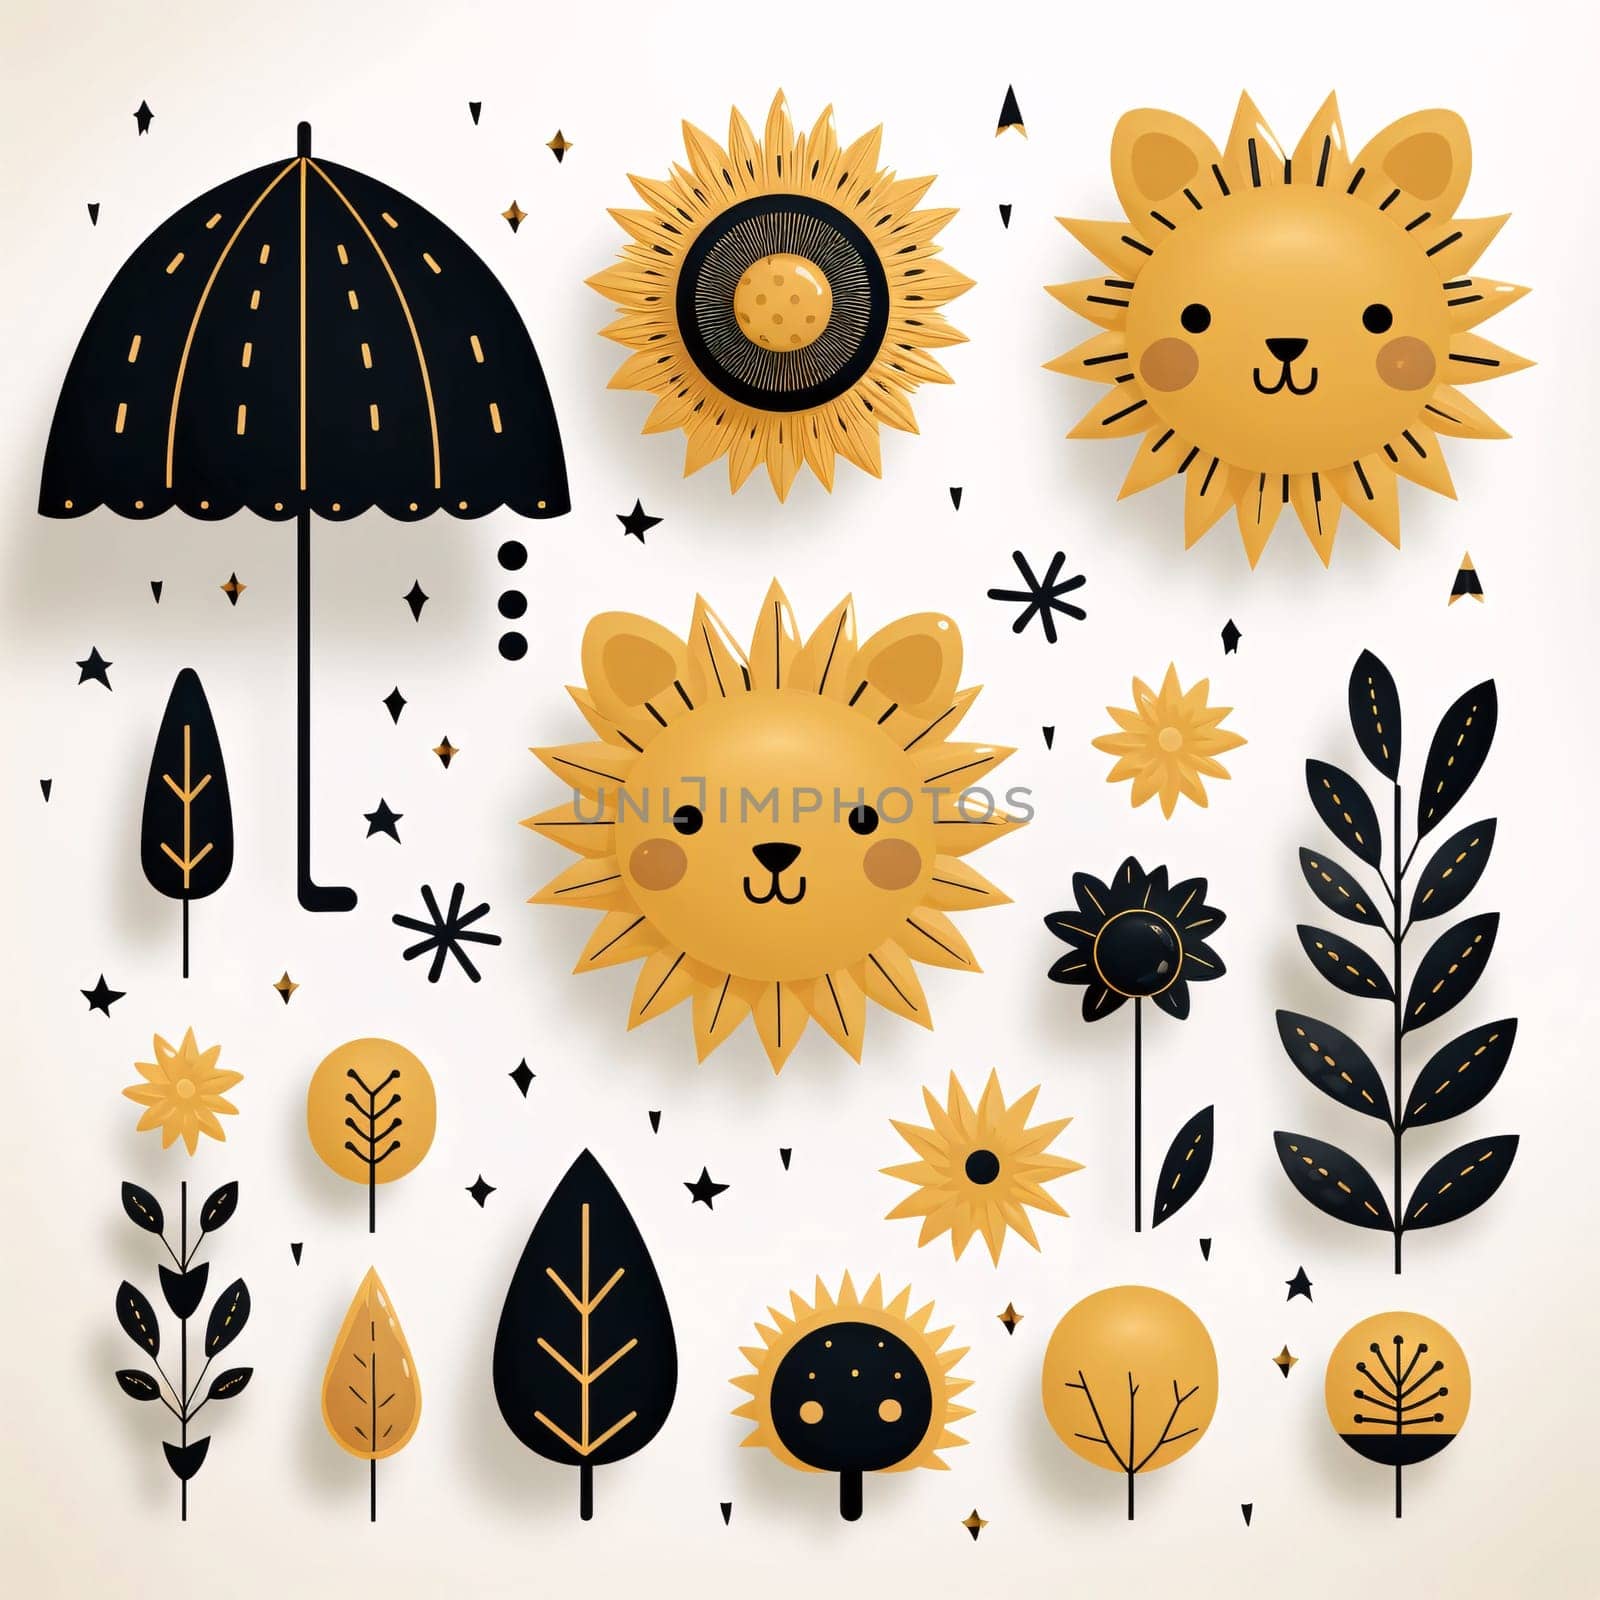 New icons collection: Set of cute hand drawn sunflower, leaf, tree, umbrella, cloud. Vector illustration.